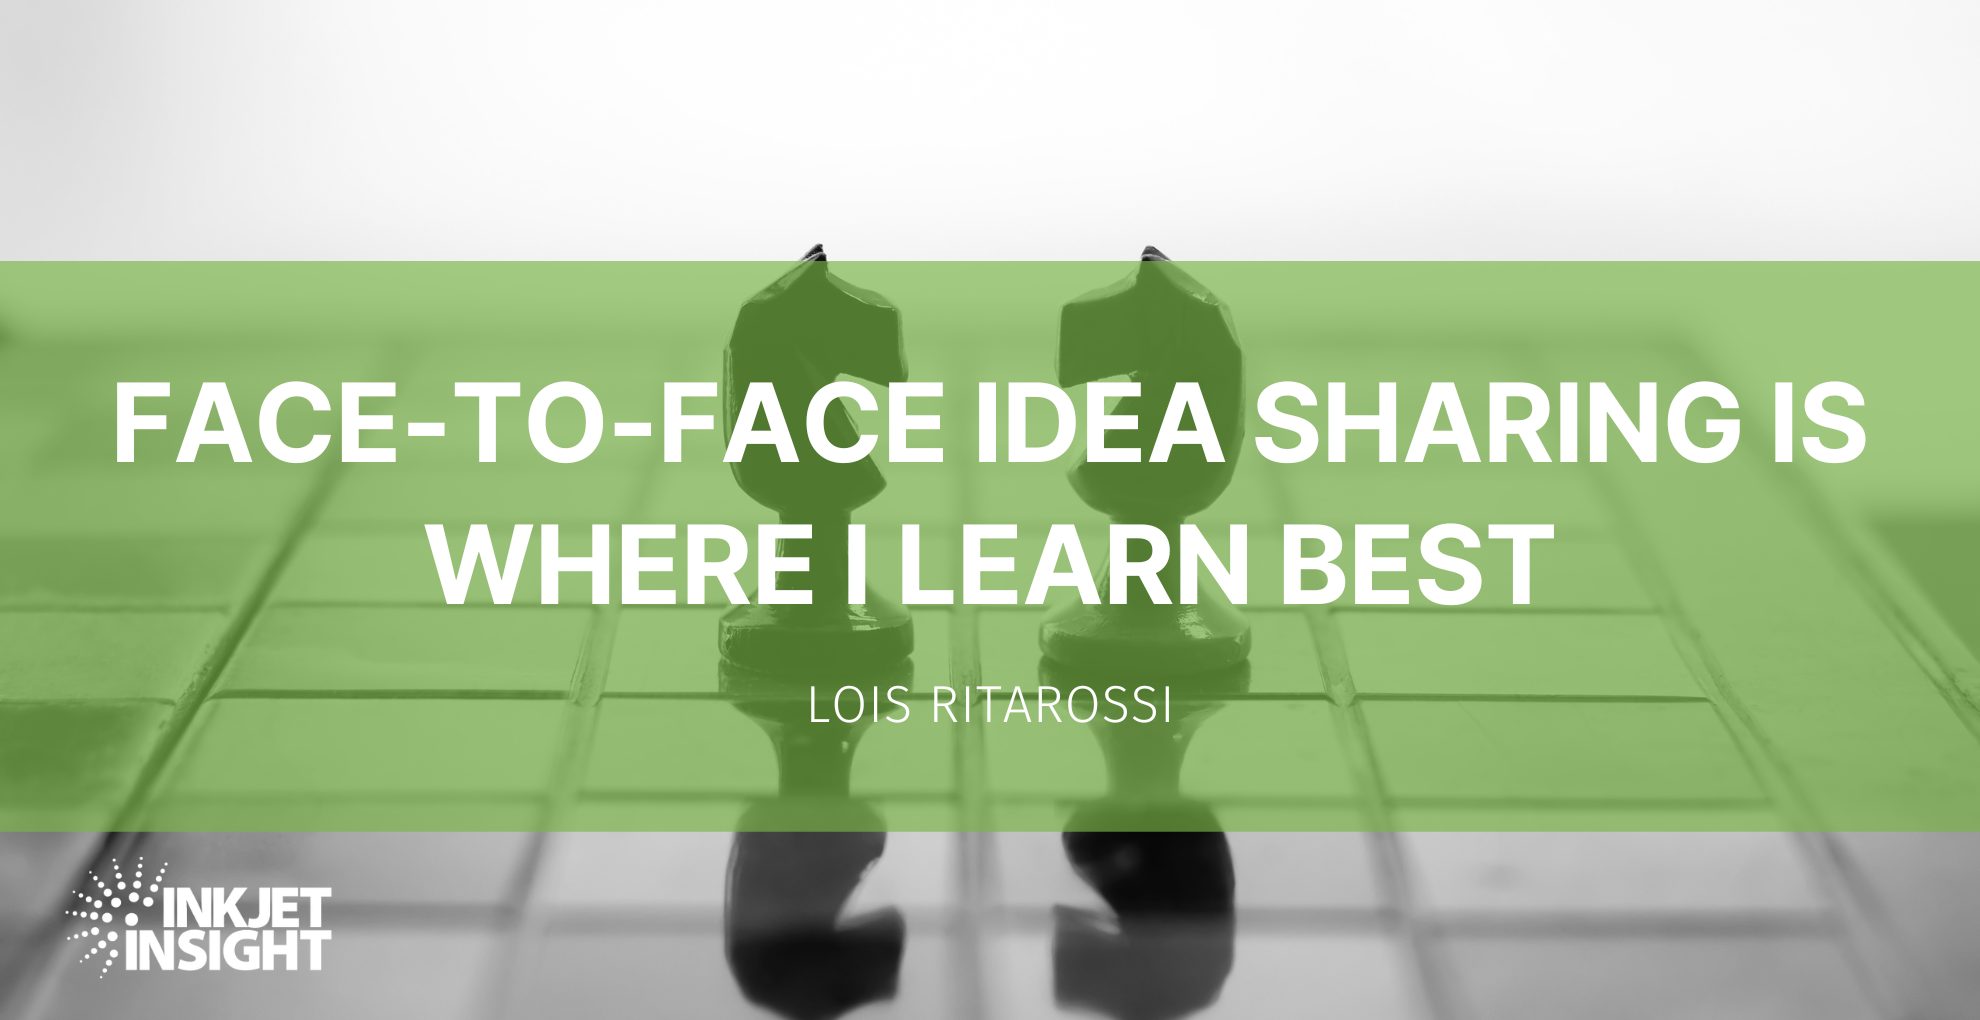 Featured image for “Face-to-face idea sharing is where I learn best”